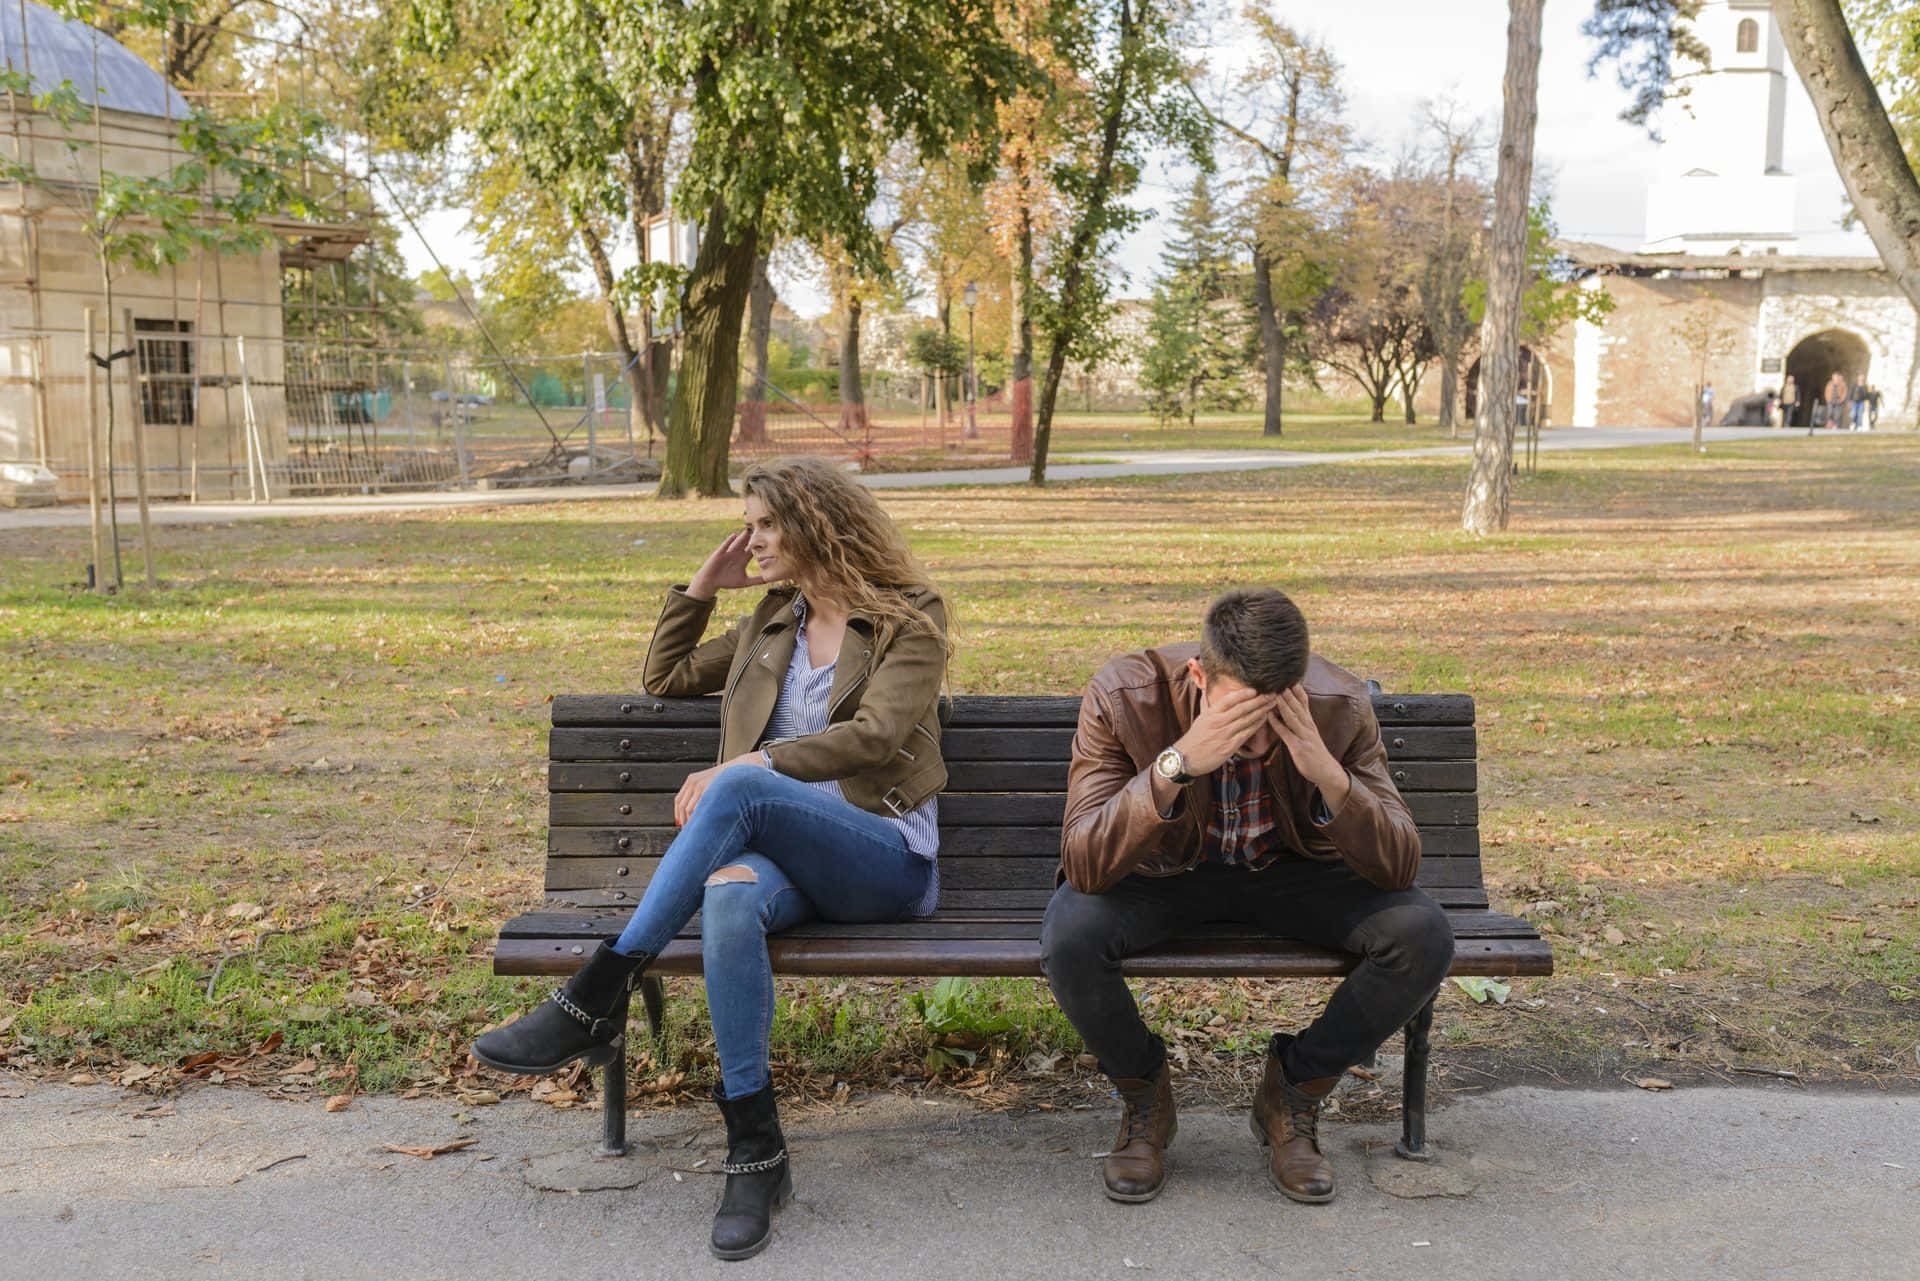 A Man And Woman Sitting On A Bench In A Park